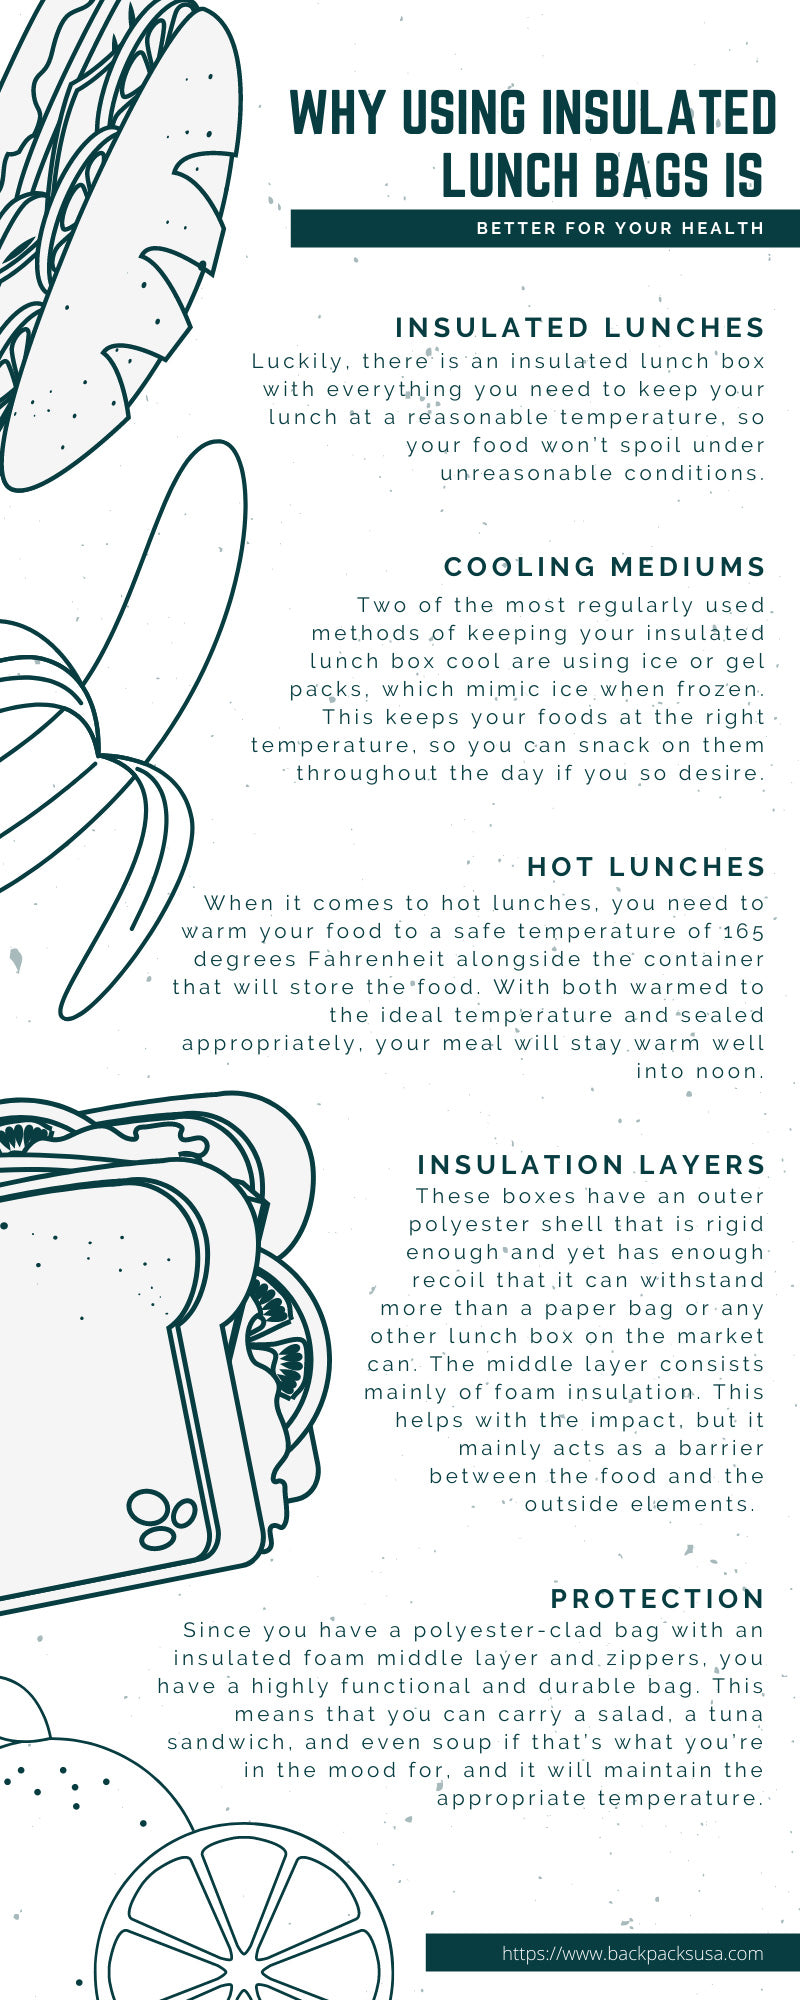 Why Using Insulated Lunch Bags Is Better for Your Health